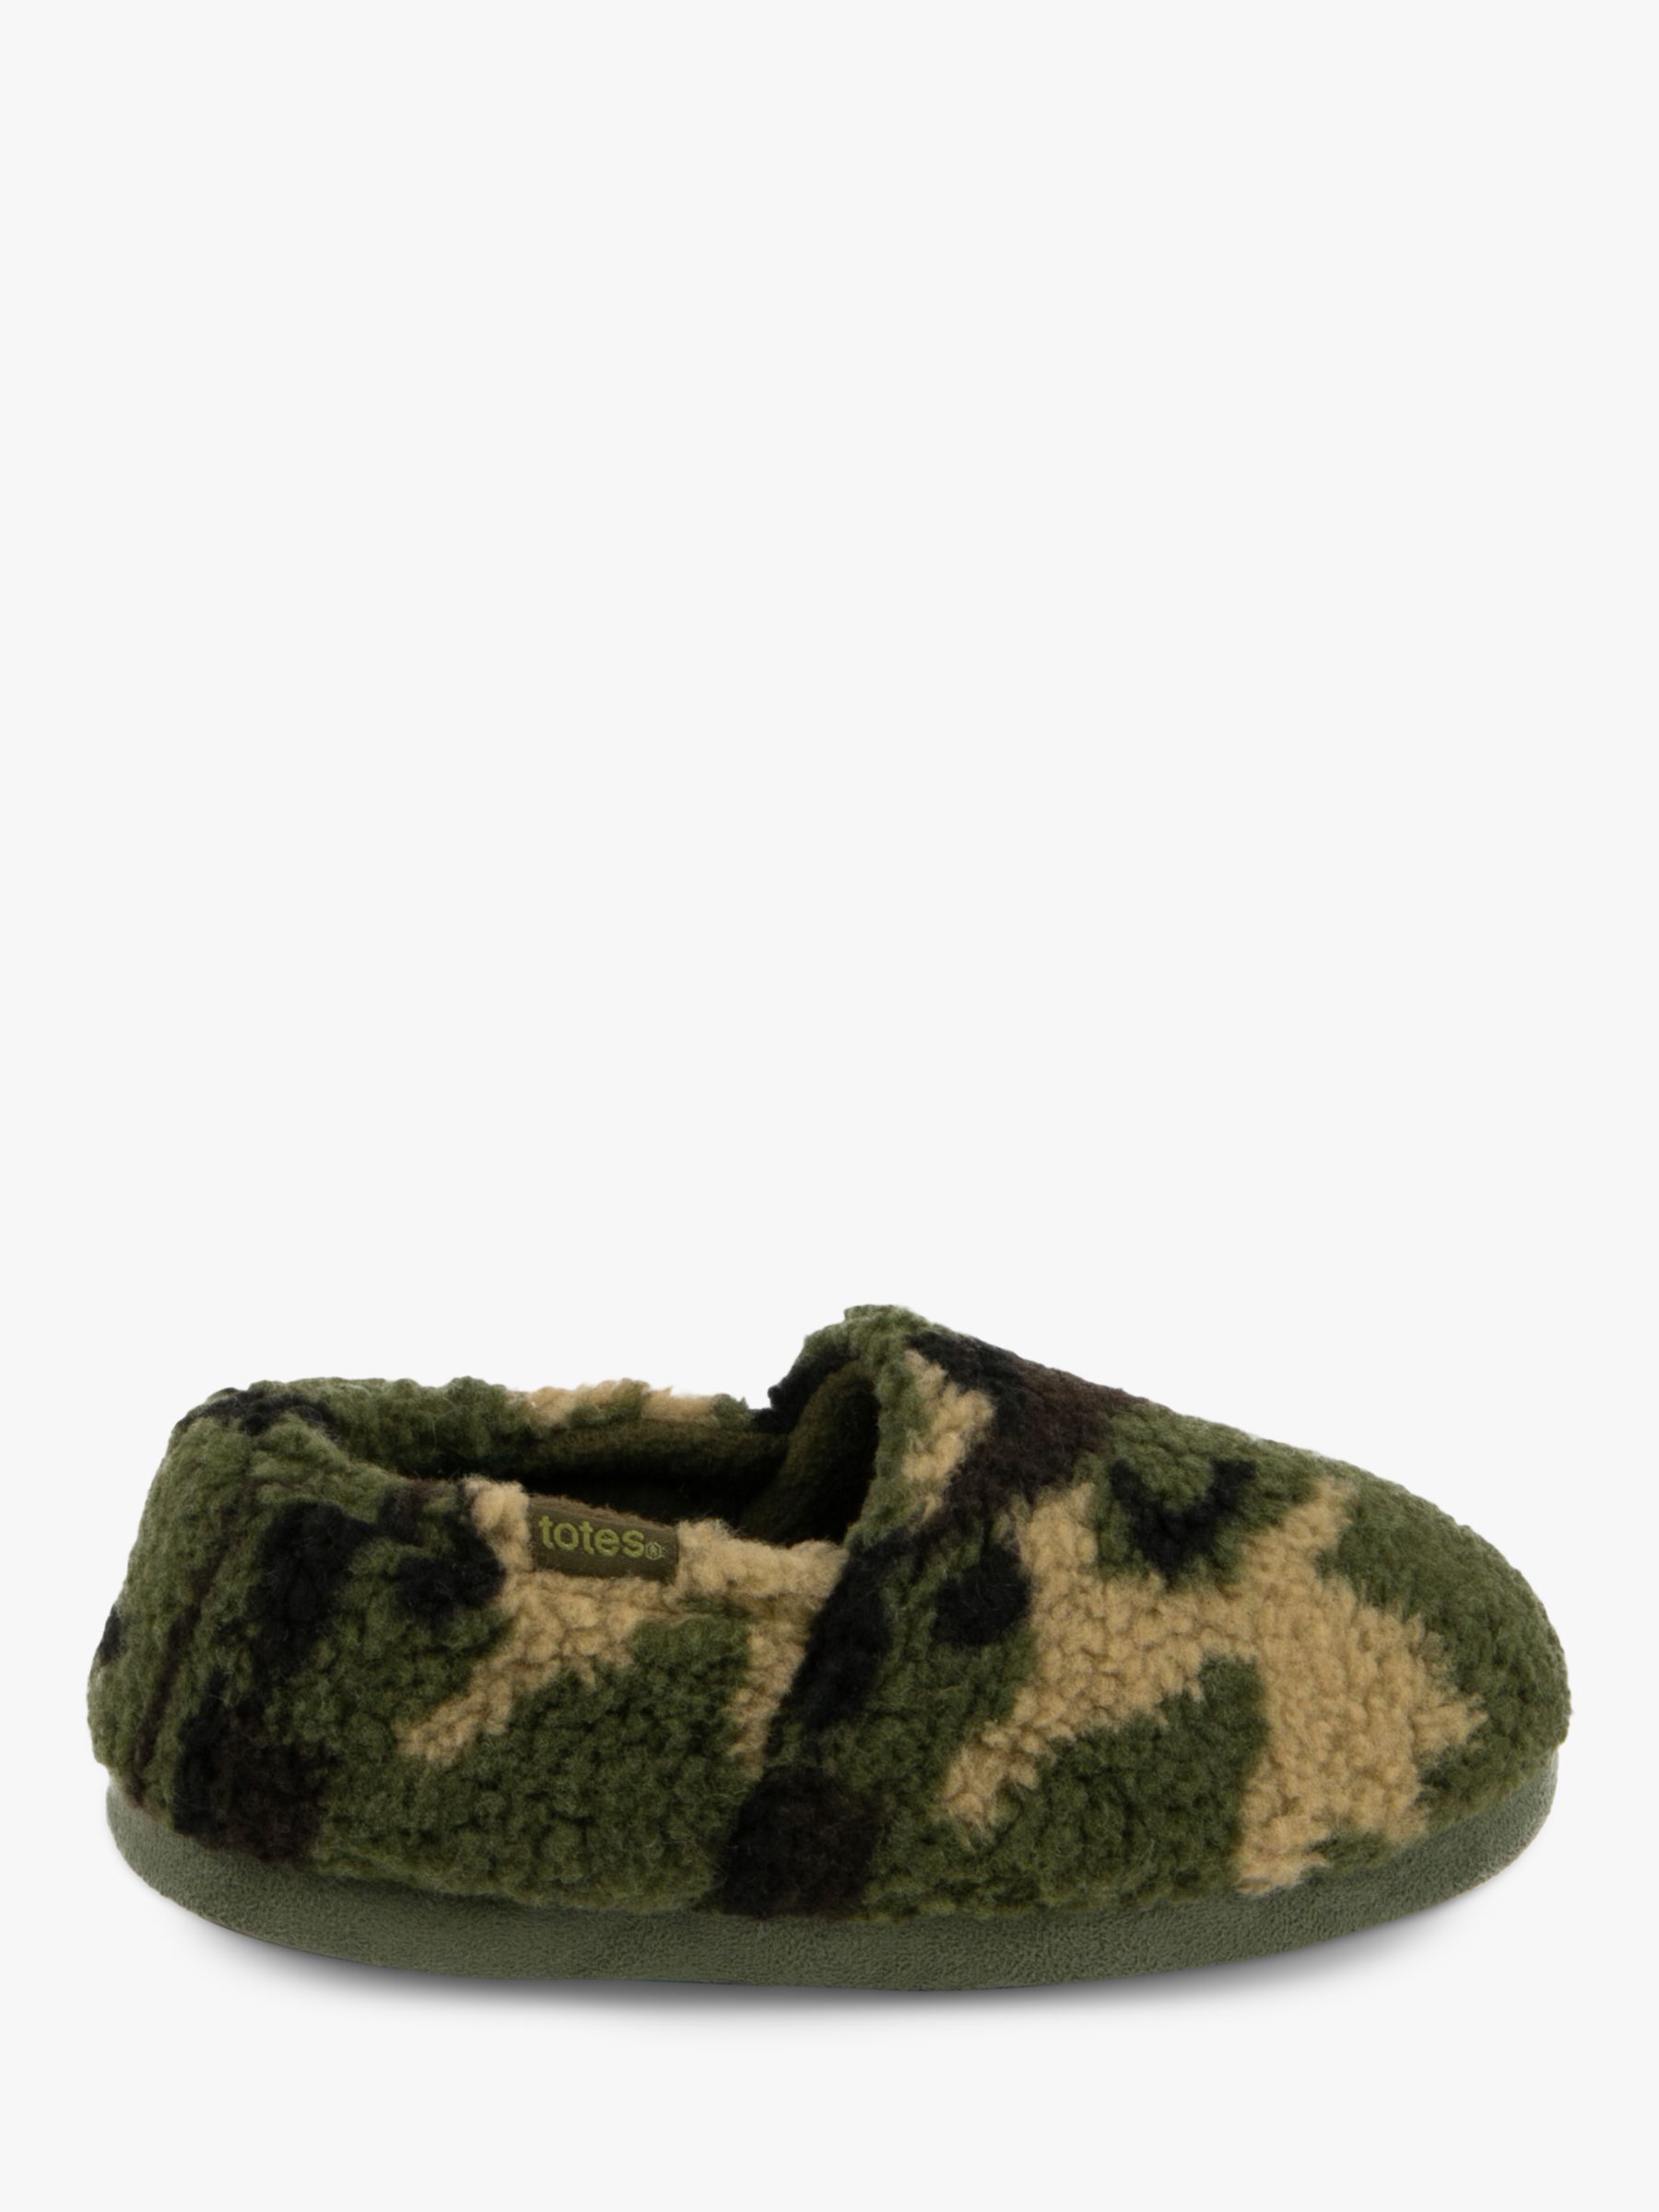 totes Kids' Camouflage Slippers, Green/Black, 11-12 Jnr